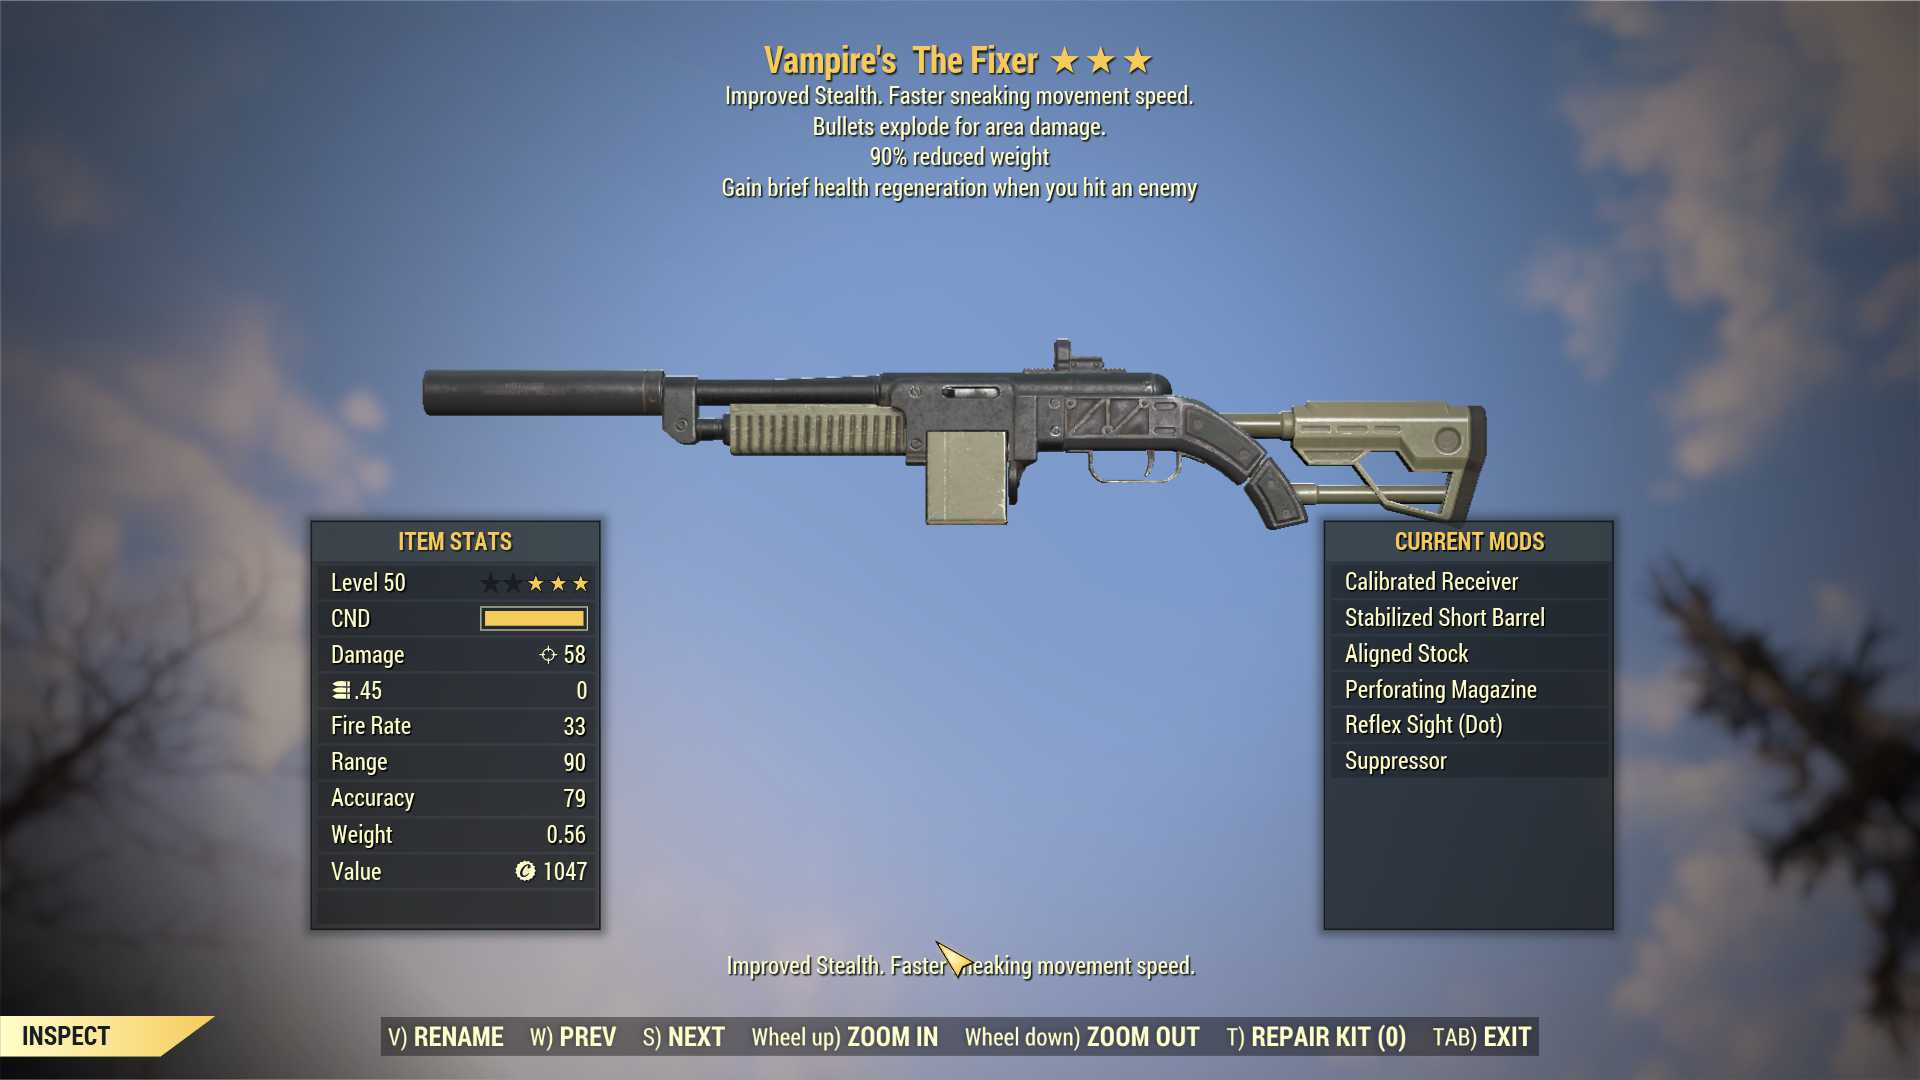 Vampire's Explosive The Fixer (90% reduced weight)